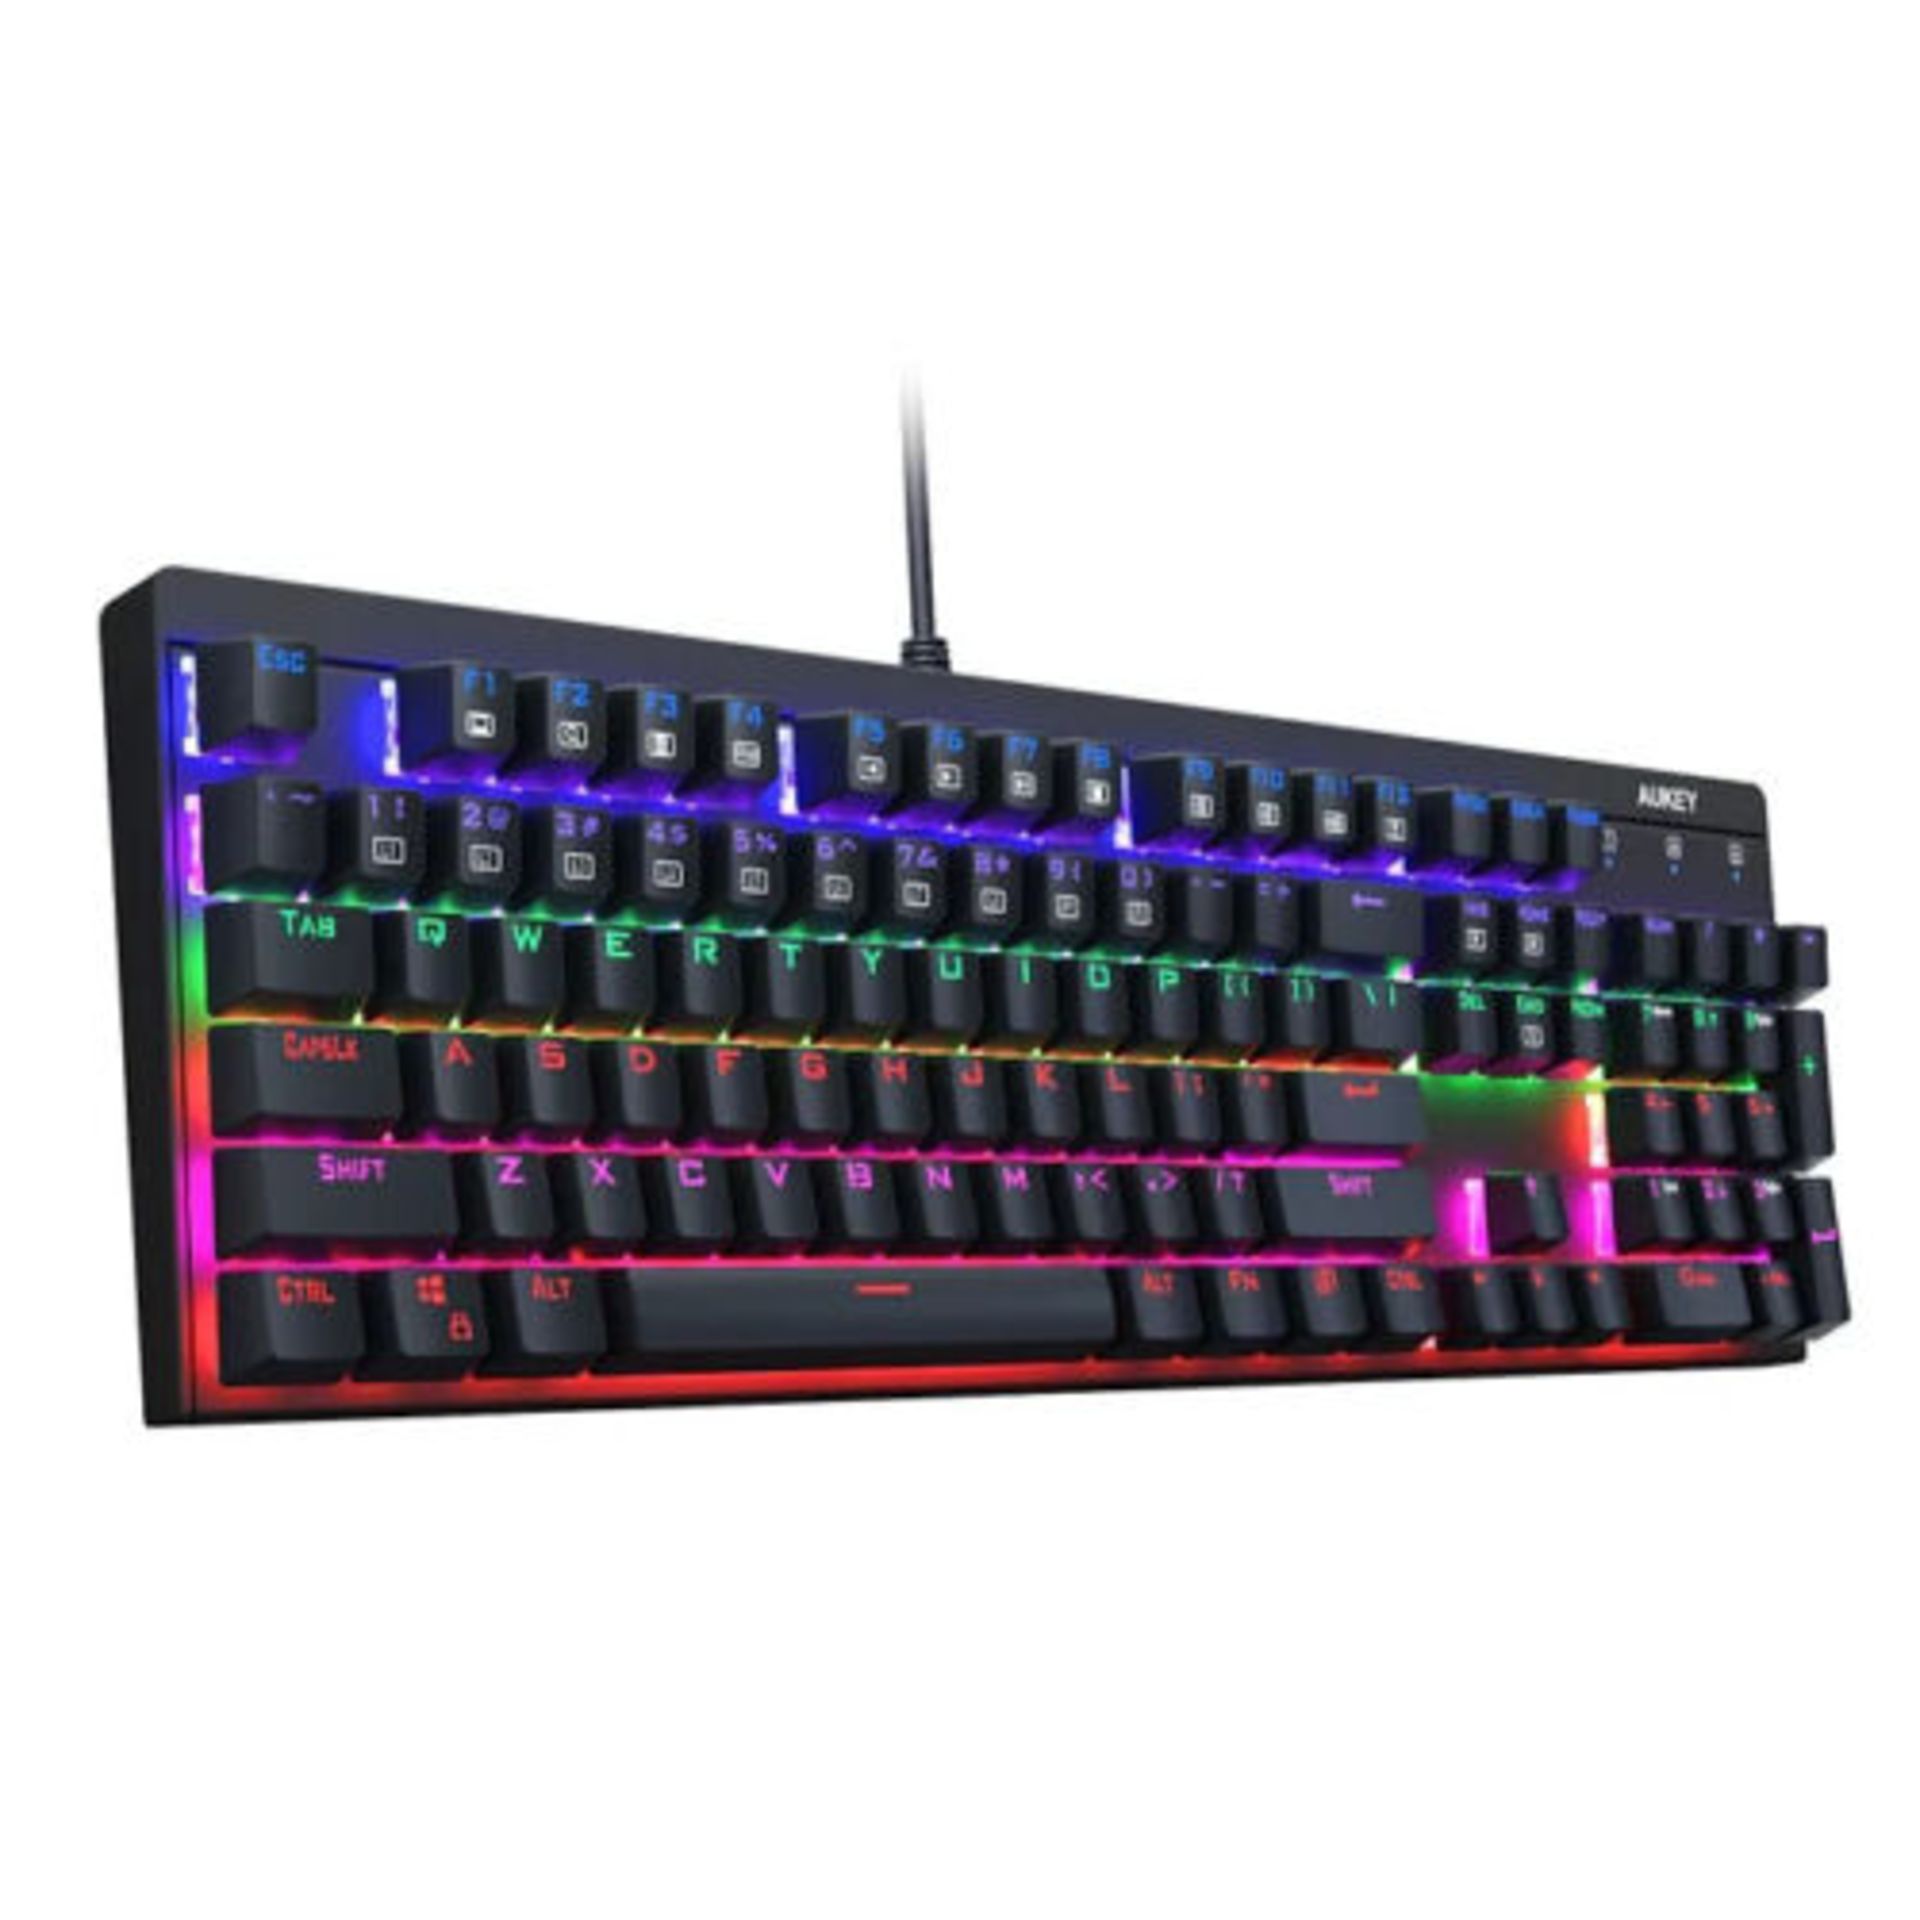 210 X AUKEY KM-G6/G16 WIRED KEYBOARD MECHANICAL FOR WINDOWS GAMING PC